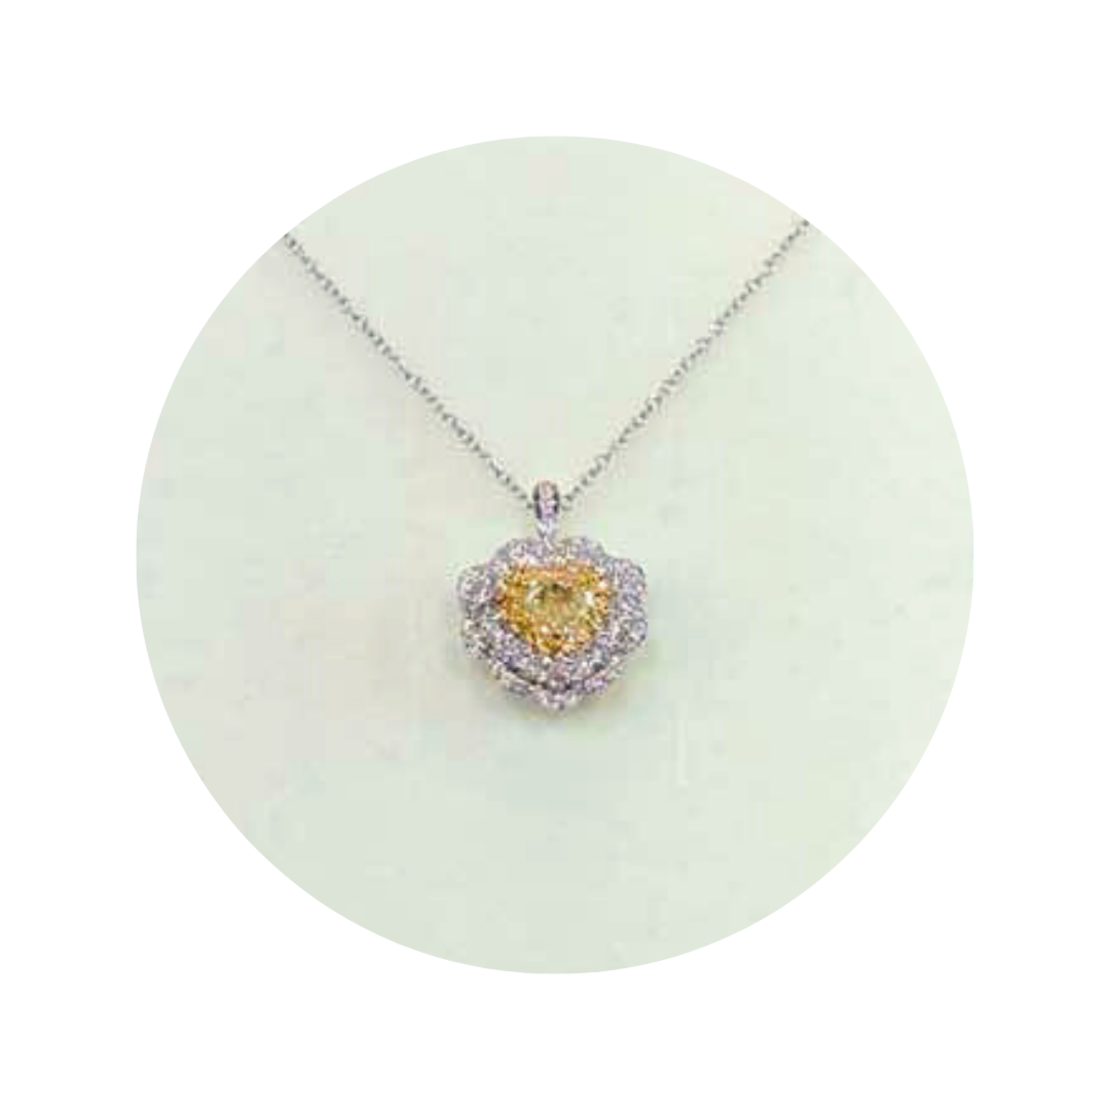 1.14 k Yellow diamond ring and necklace